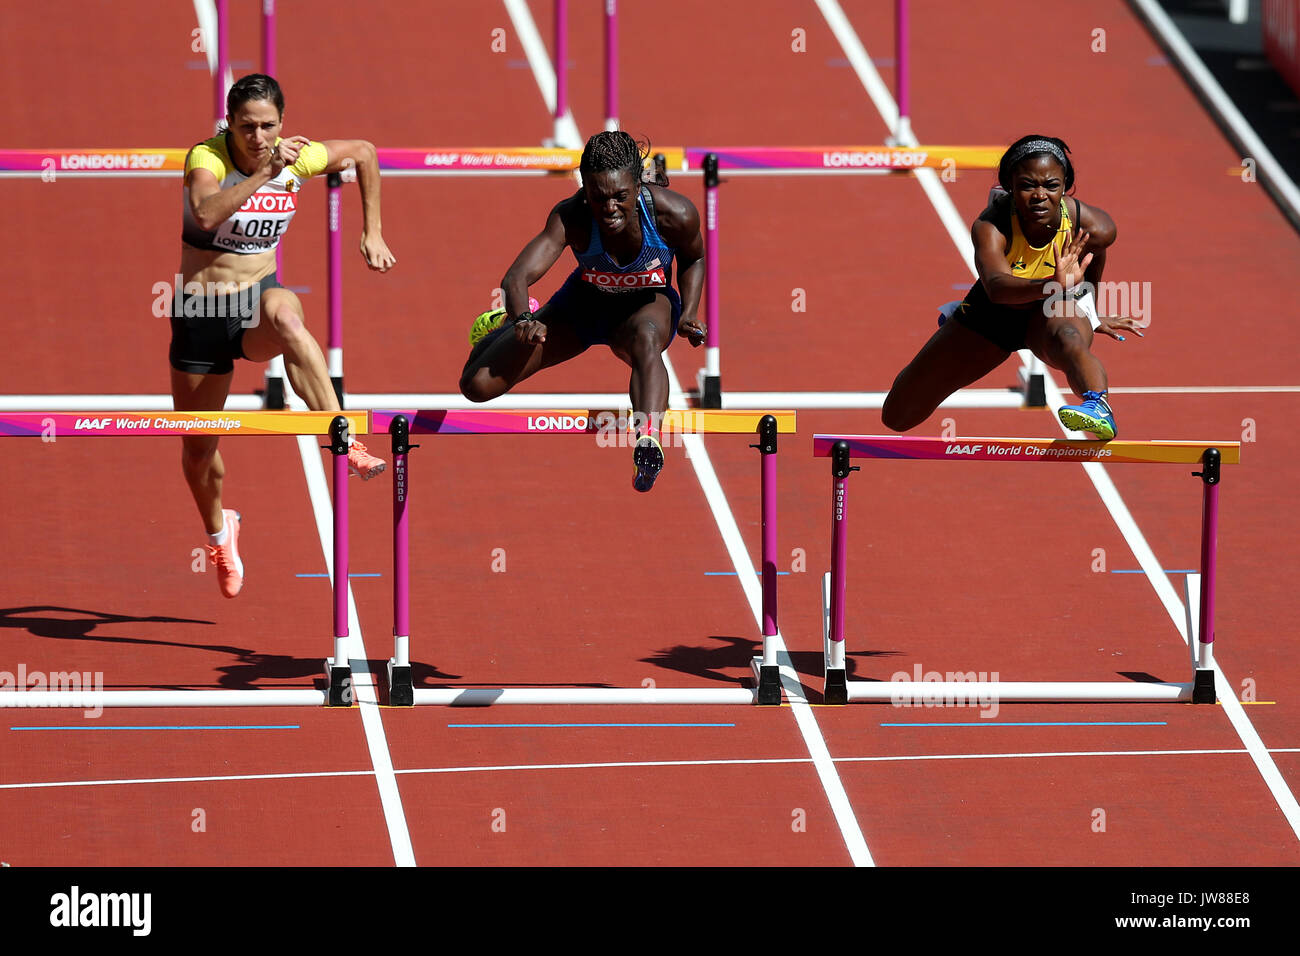 USA's Dawn Harper Nelson (centre) in action during the Women's 100m hurdles heats during day eight of the 2017 IAAF World Championships at the London Stadium. PRESS ASSOCIATION Photo. Picture date: Friday August 11, 2017. See PA story ATHLETICS World. Photo credit should read: Jonathan Brady/PA Wire. Stock Photo